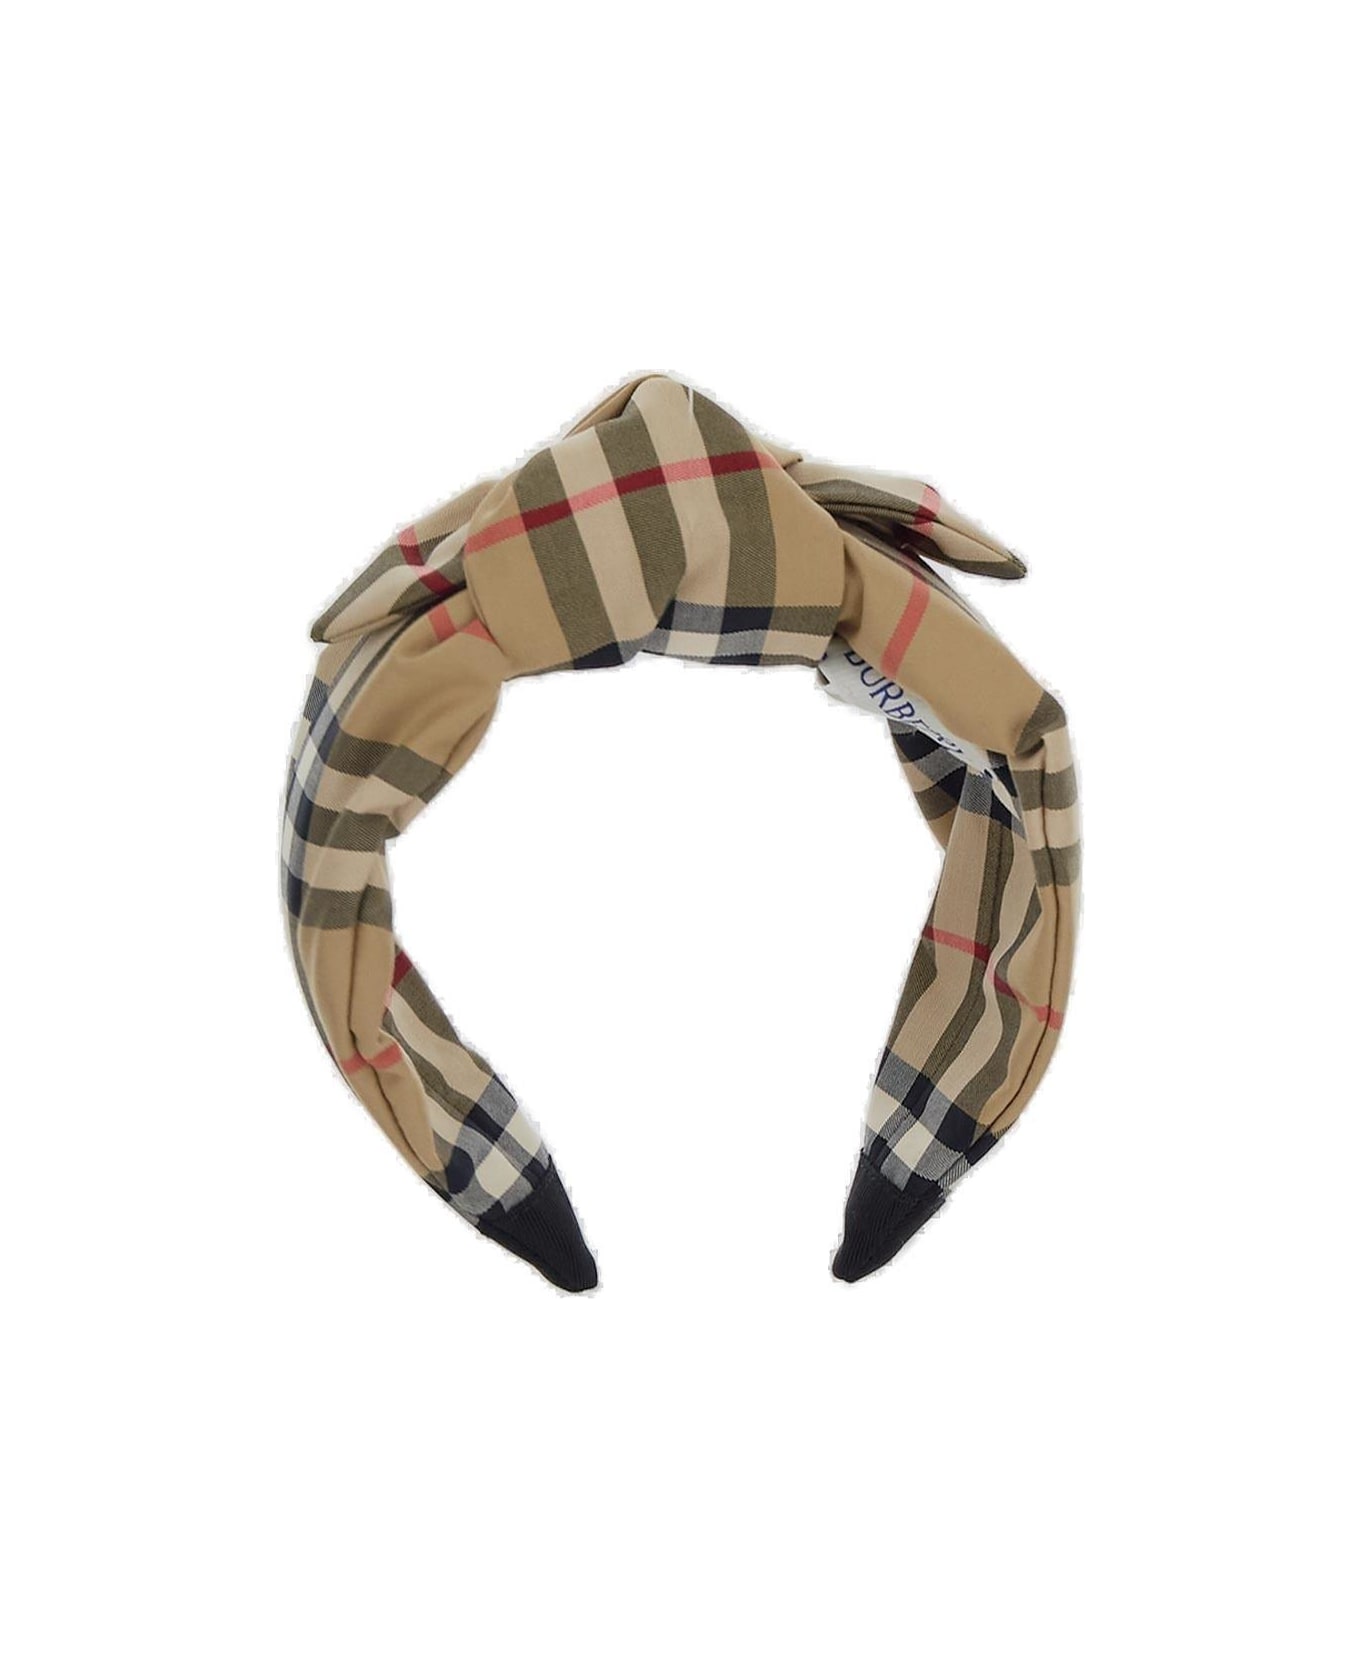 Burberry Checked Knot-detailed Headband - Archive beige chk アクセサリー＆ギフト